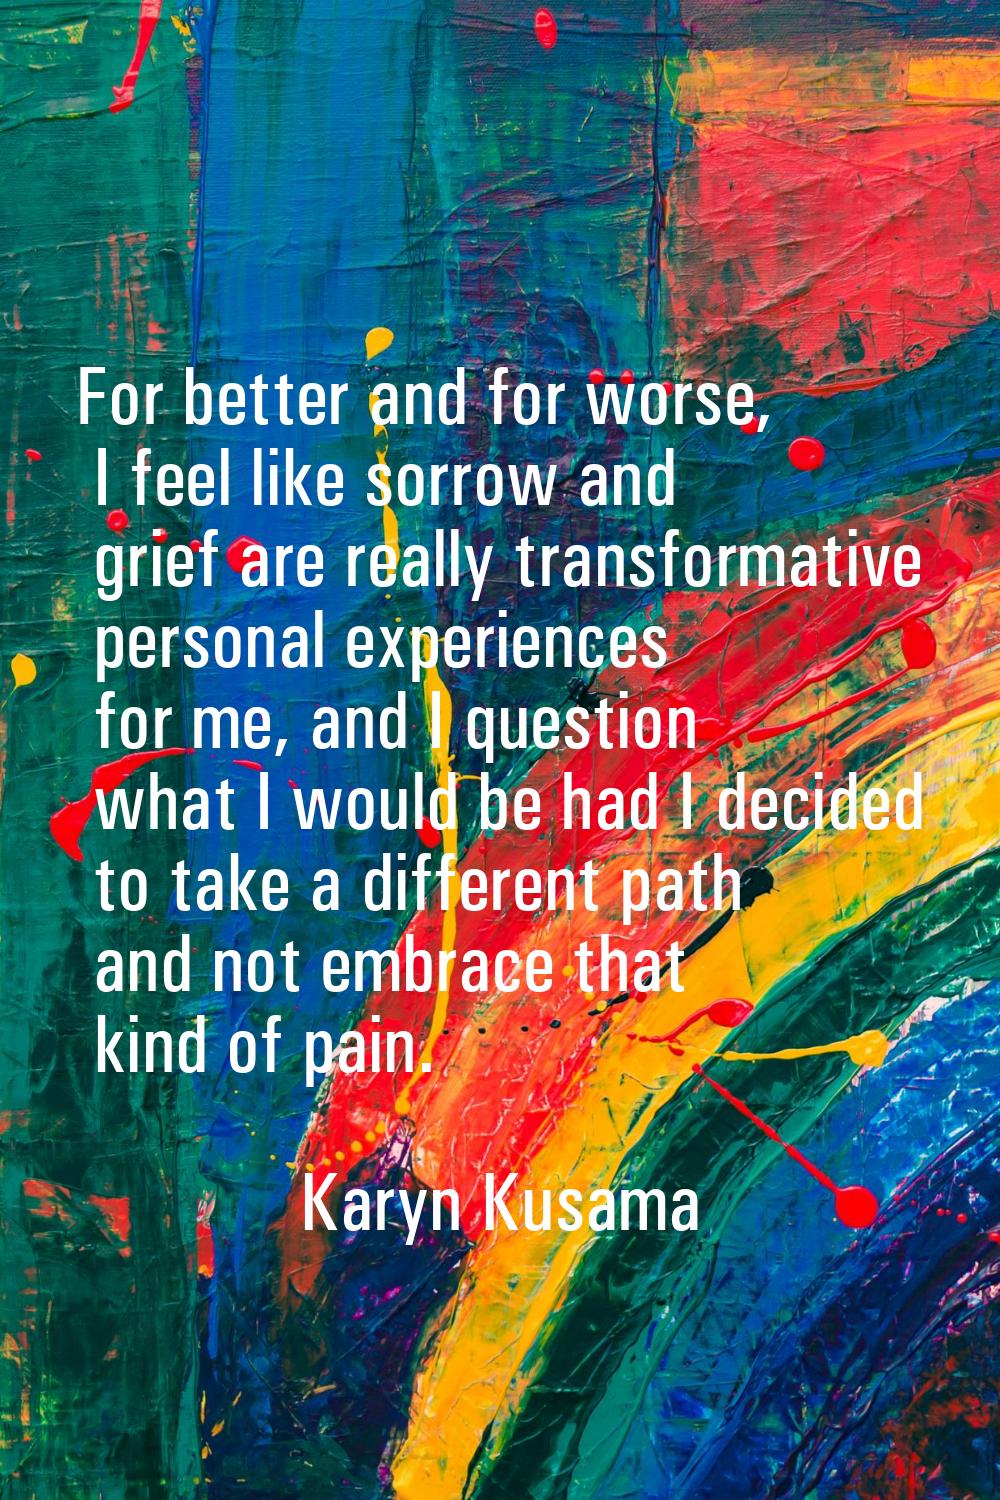 For better and for worse, I feel like sorrow and grief are really transformative personal experienc